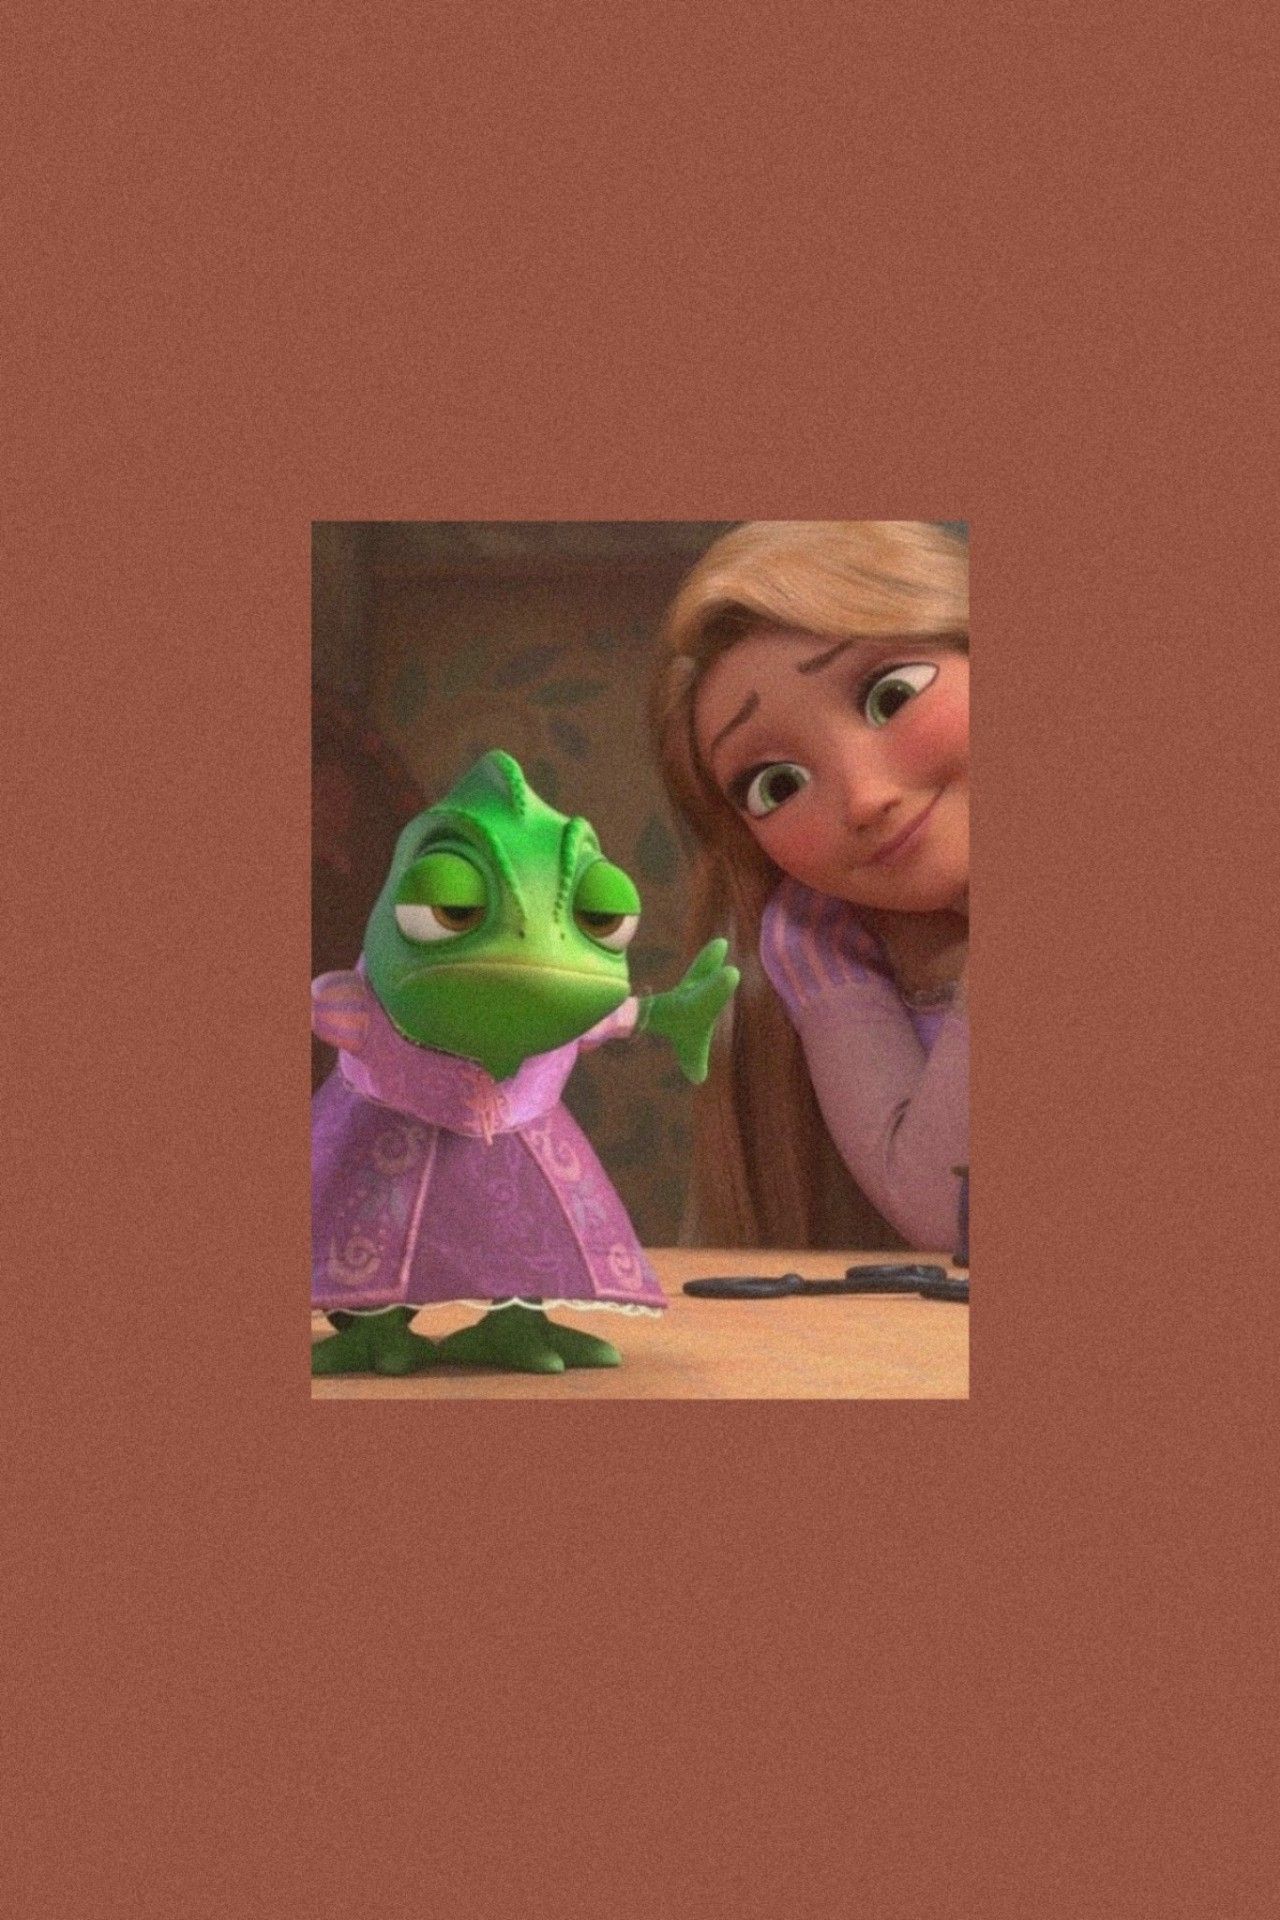 A cartoon image of a girl and a frog - Rapunzel